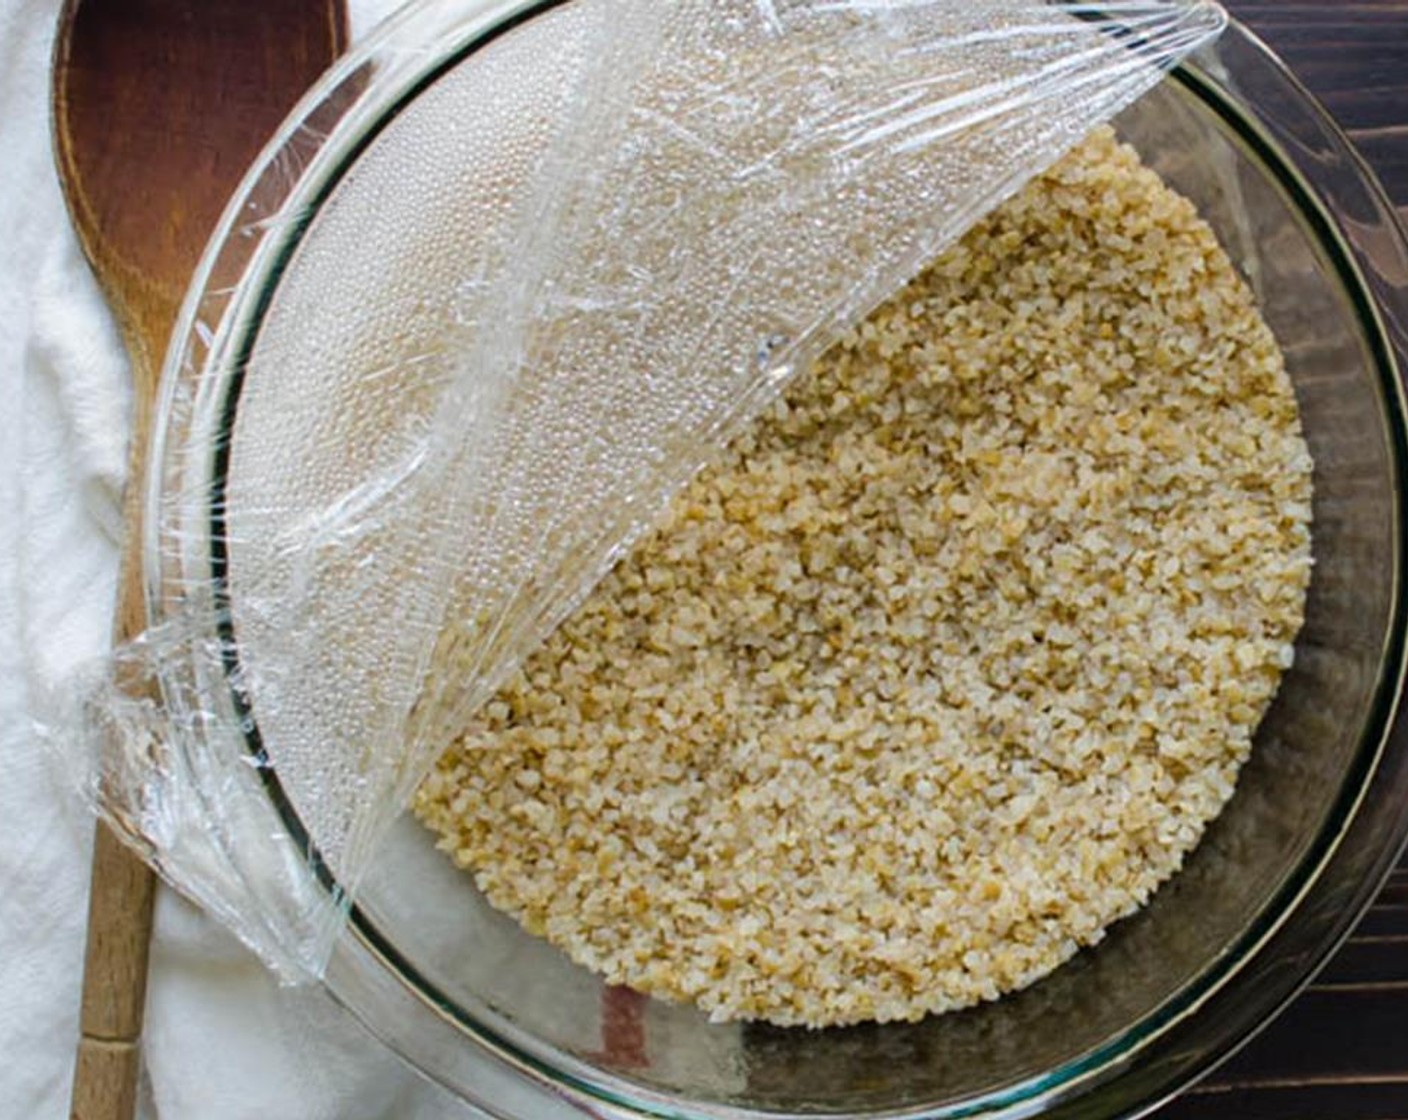 step 1 In a medium bowl add Bulgur Wheat (1 cup) and boiling Water (1 3/4 cups) and cover tightly with saran wrap. Set aside for 15-20 minutes for the wheat to absorb the liquid.